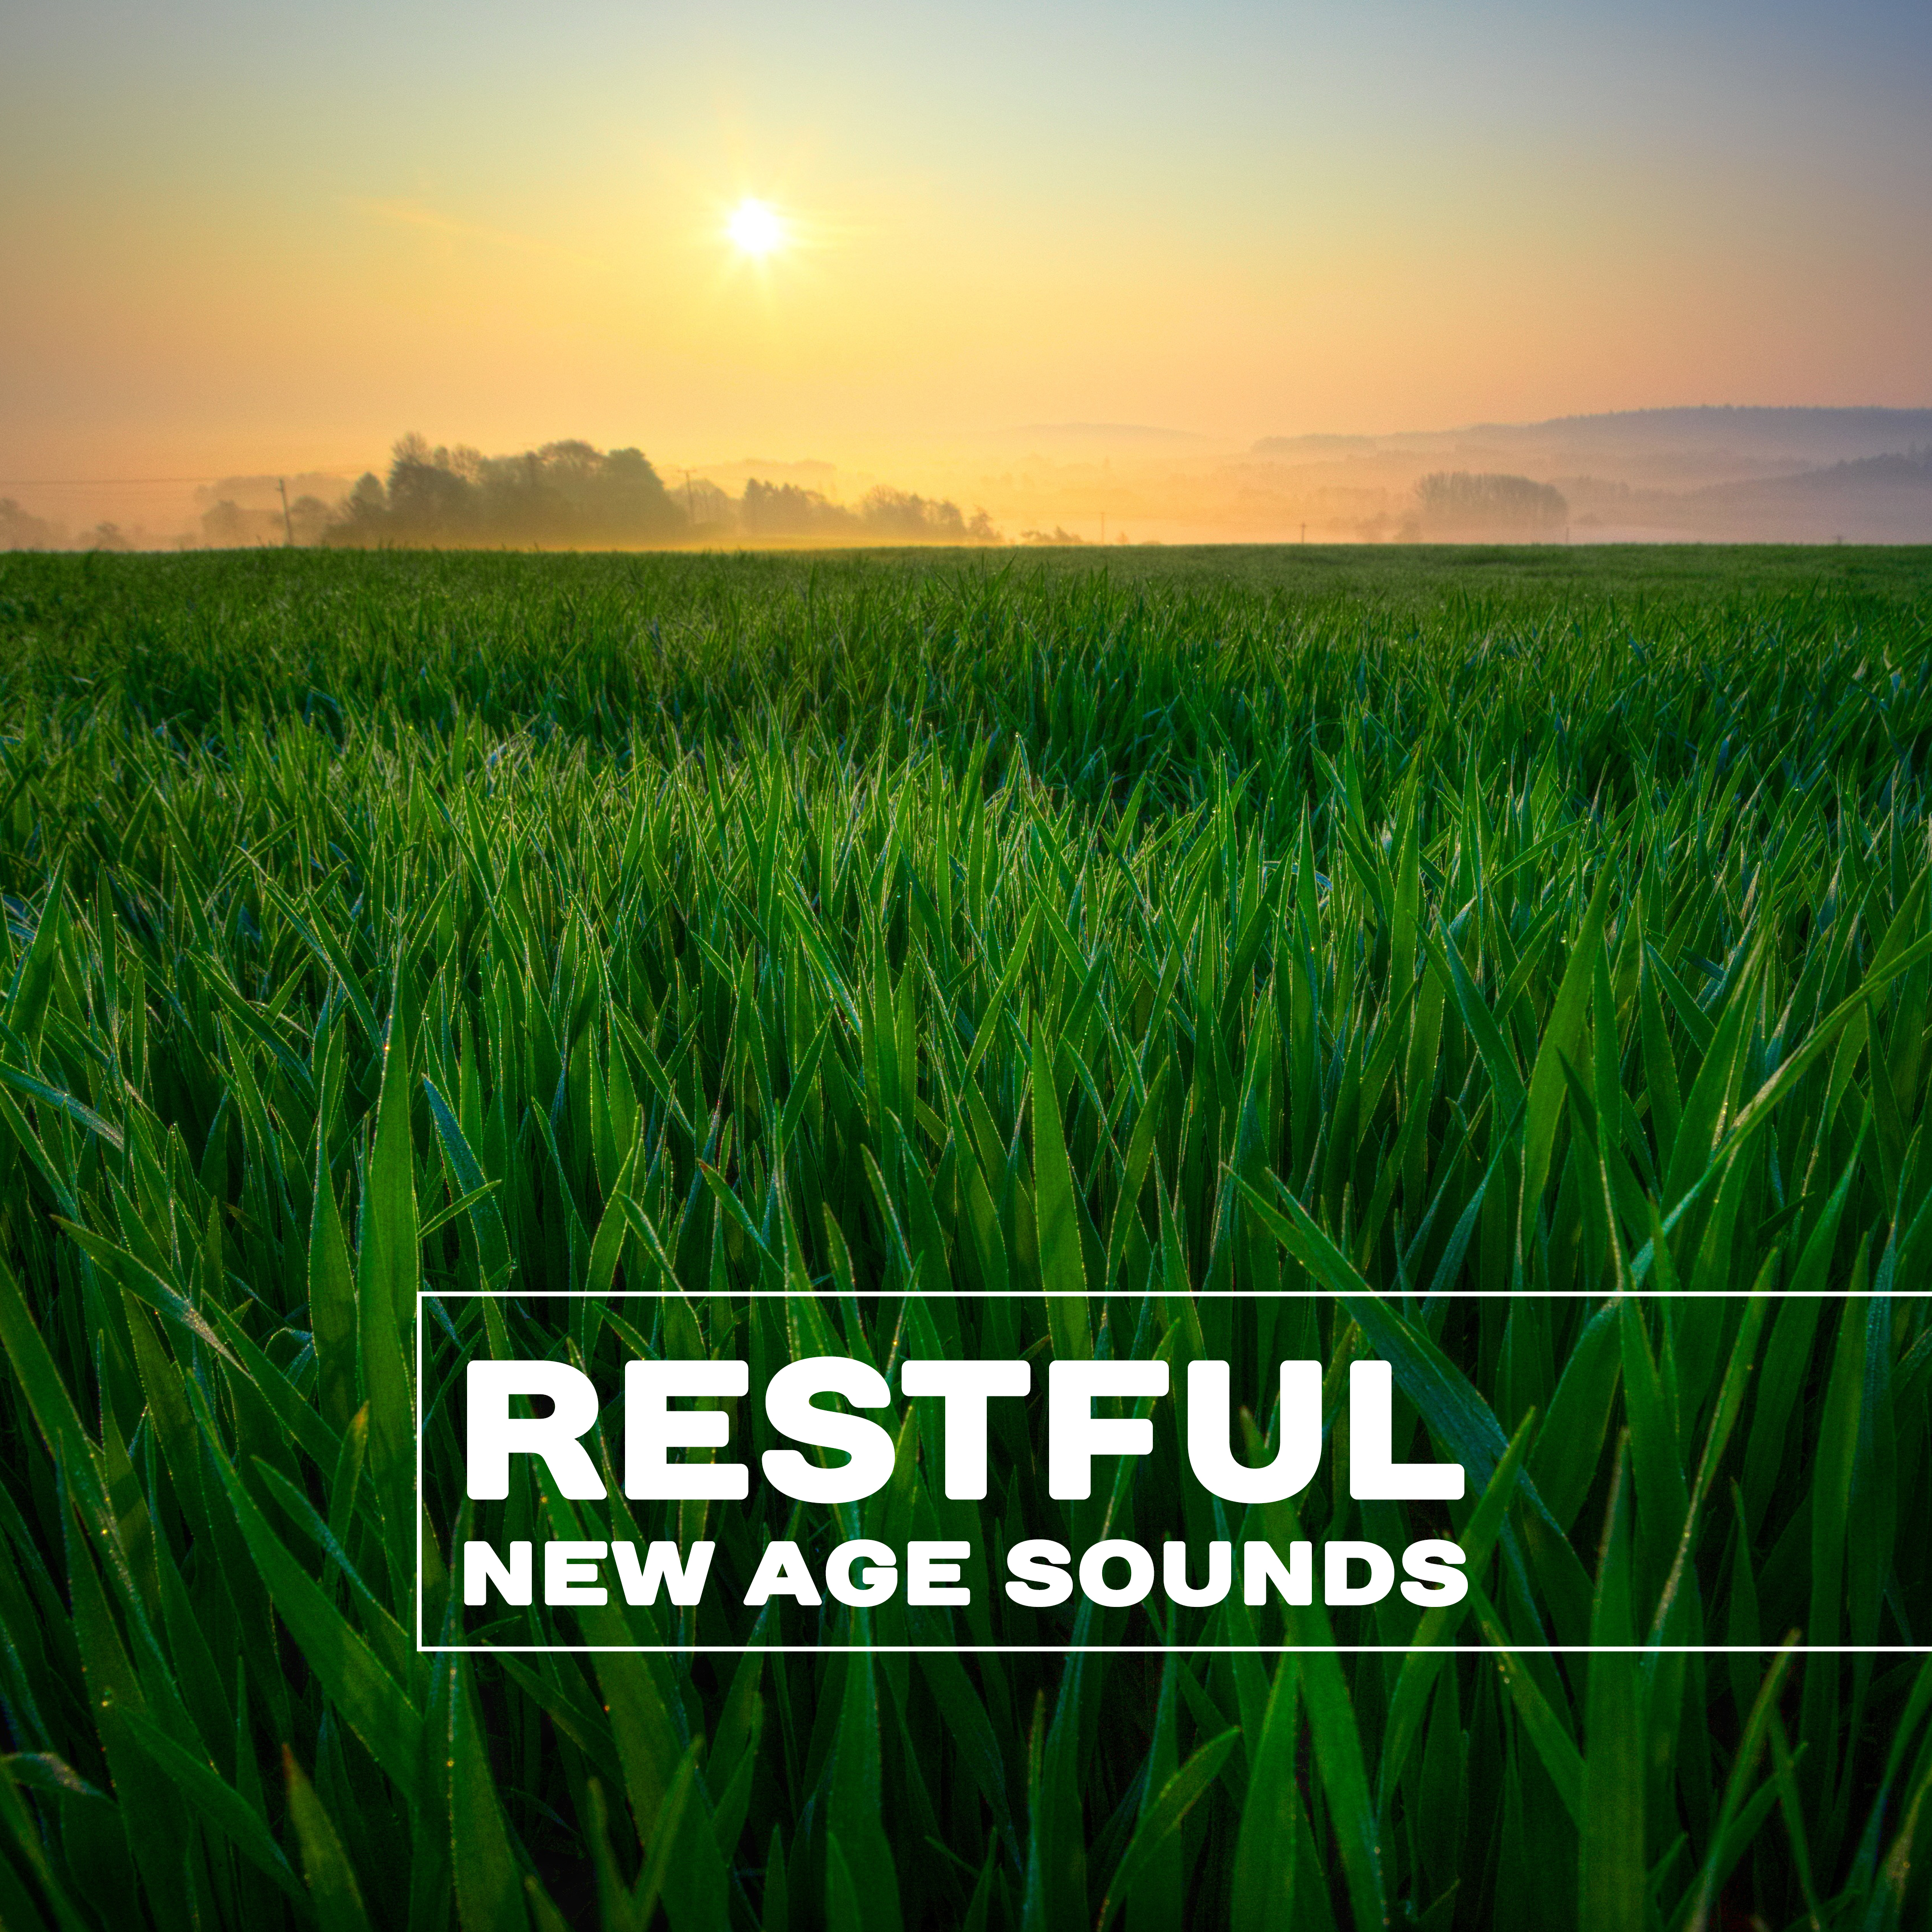 Restful New Age Sounds – Spiritual Relaxation, Inner Peace, Rest a Bit, Relax Yourself